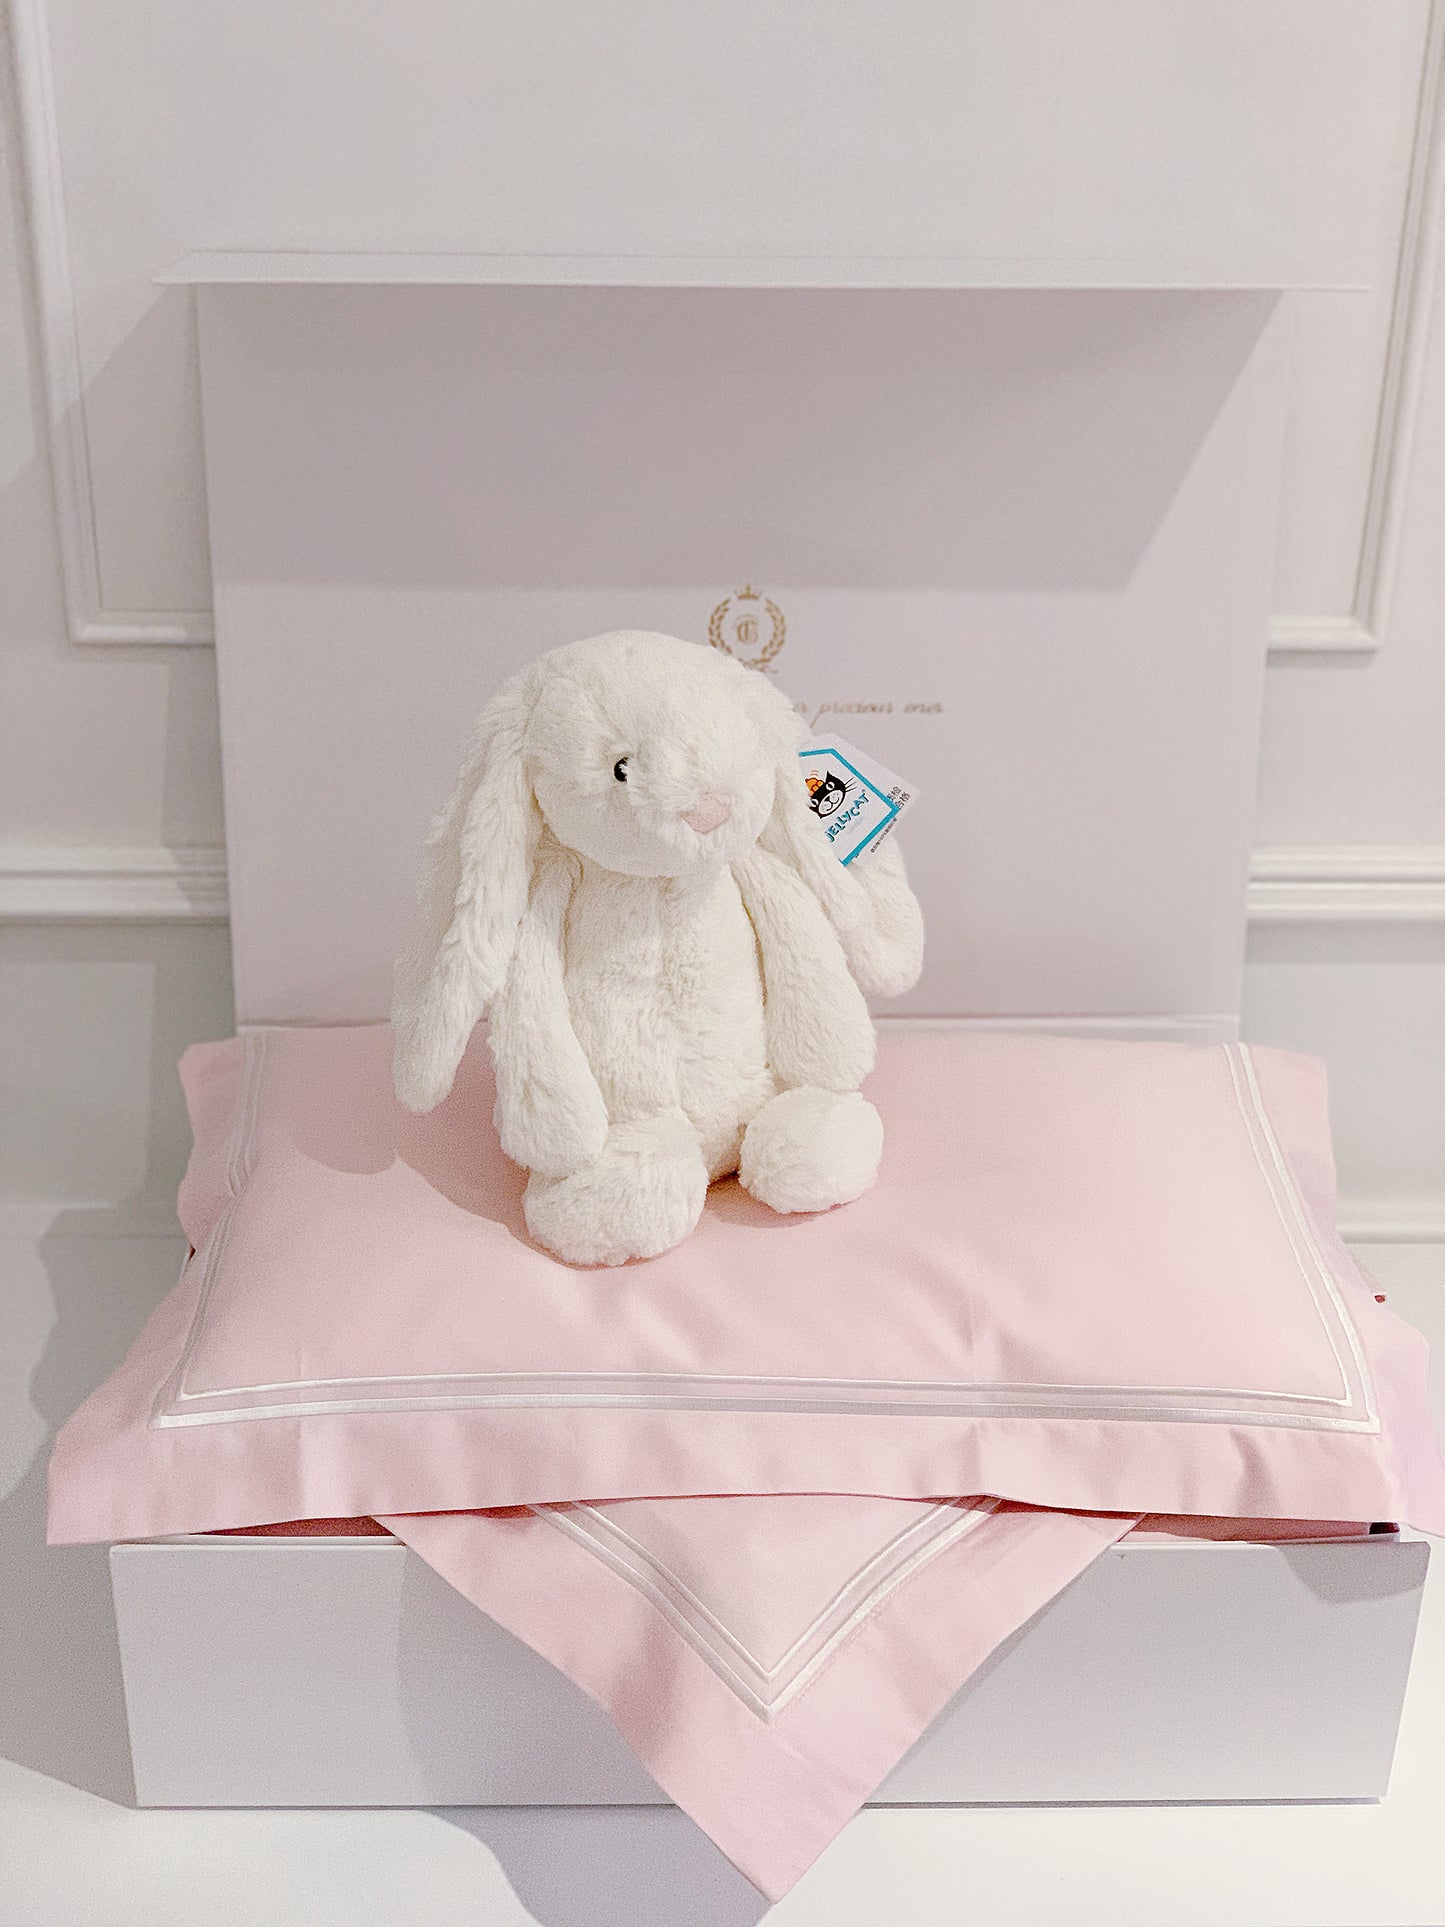 Best Gift ideas for newborn baby girl with Jellycat Bashful Cream Bunny Toy